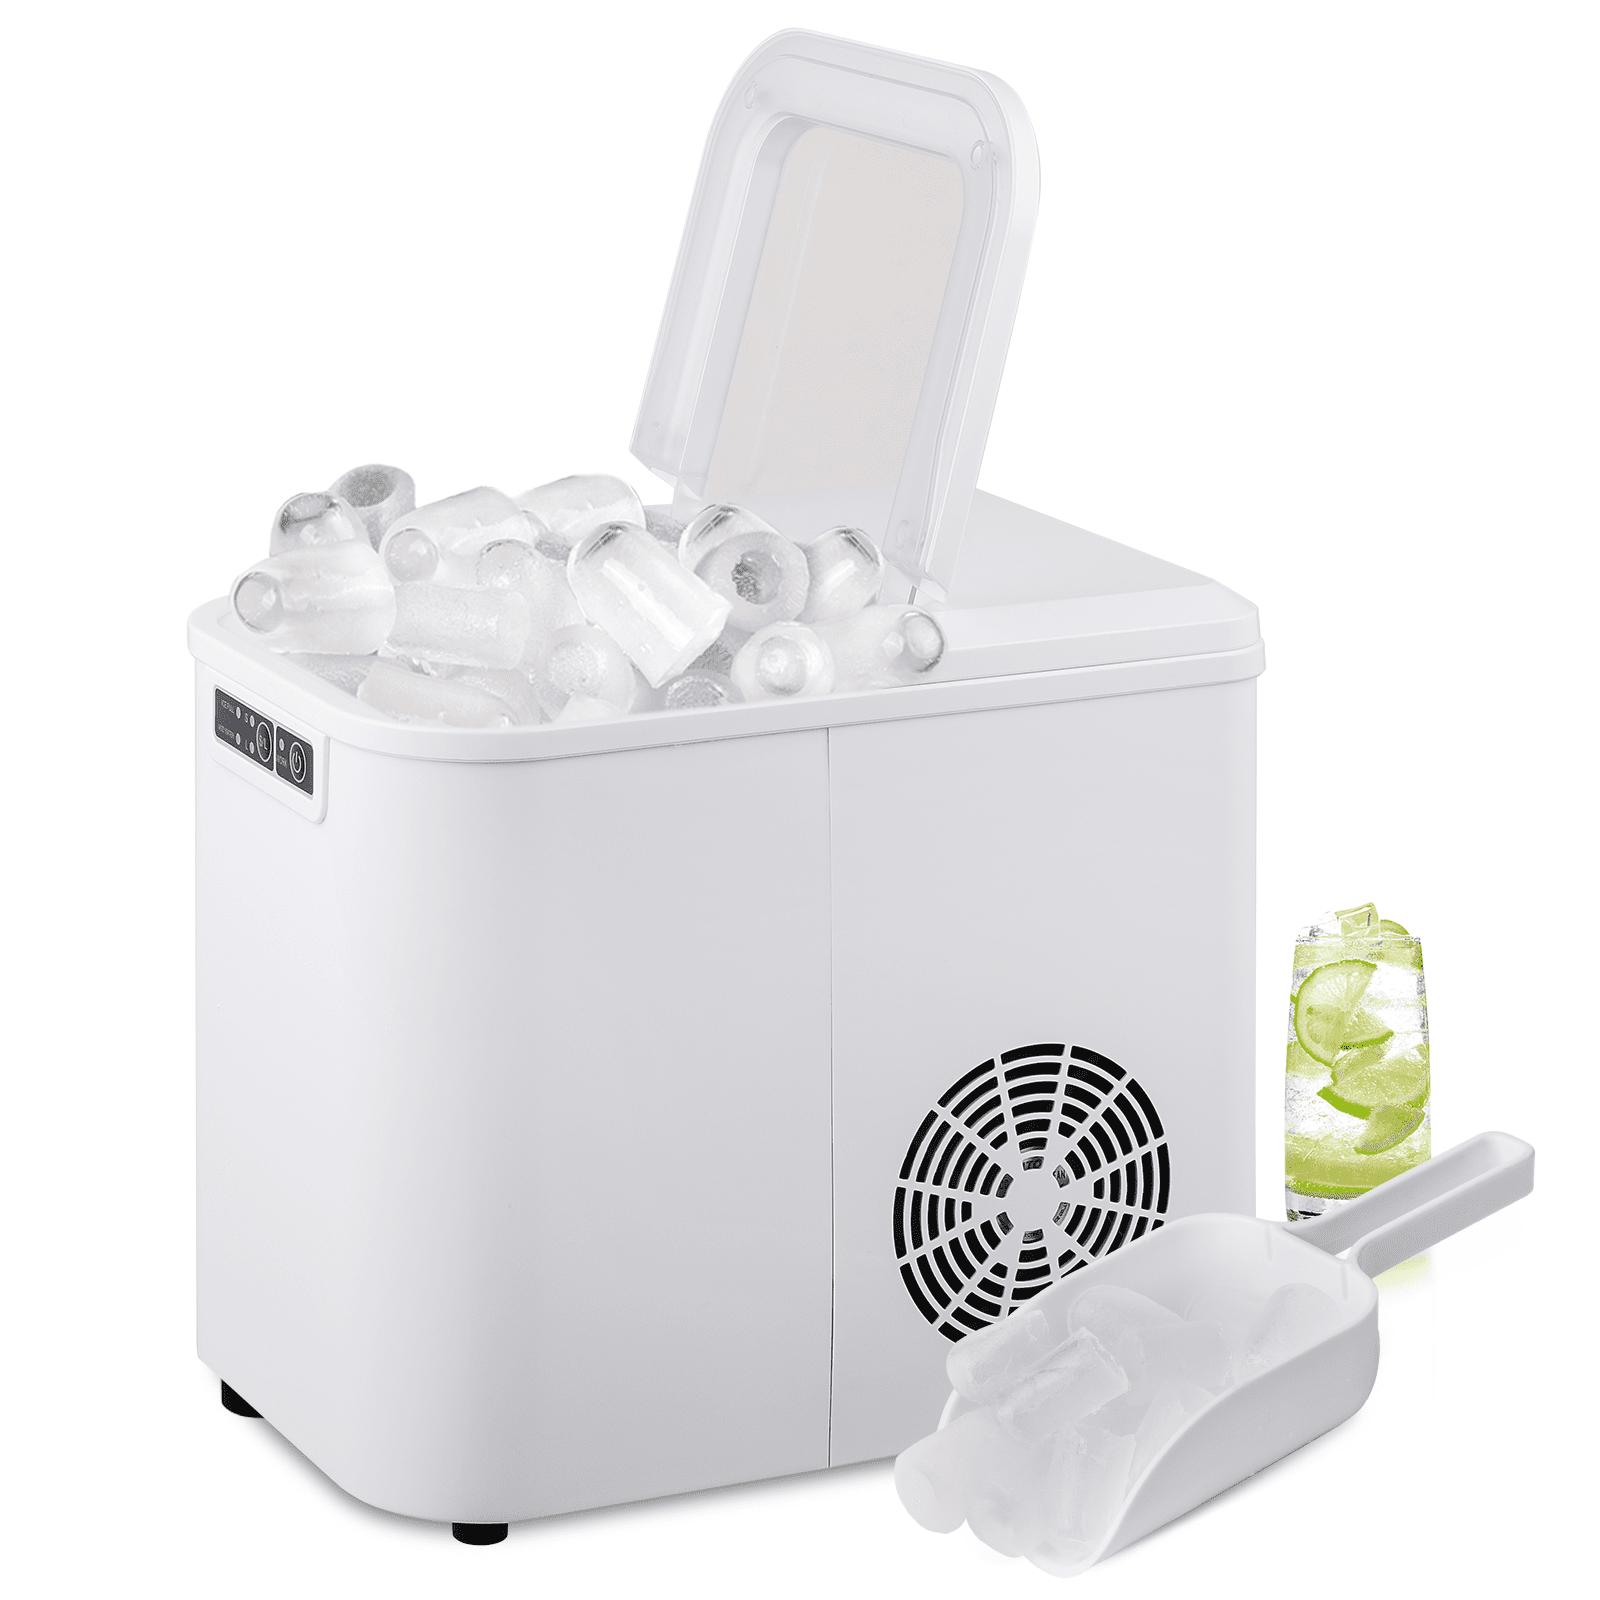 KISSAIR Countertop Ice Maker Machine 6-Minute Fast Bullet Ice Simple H –  agluckyshop